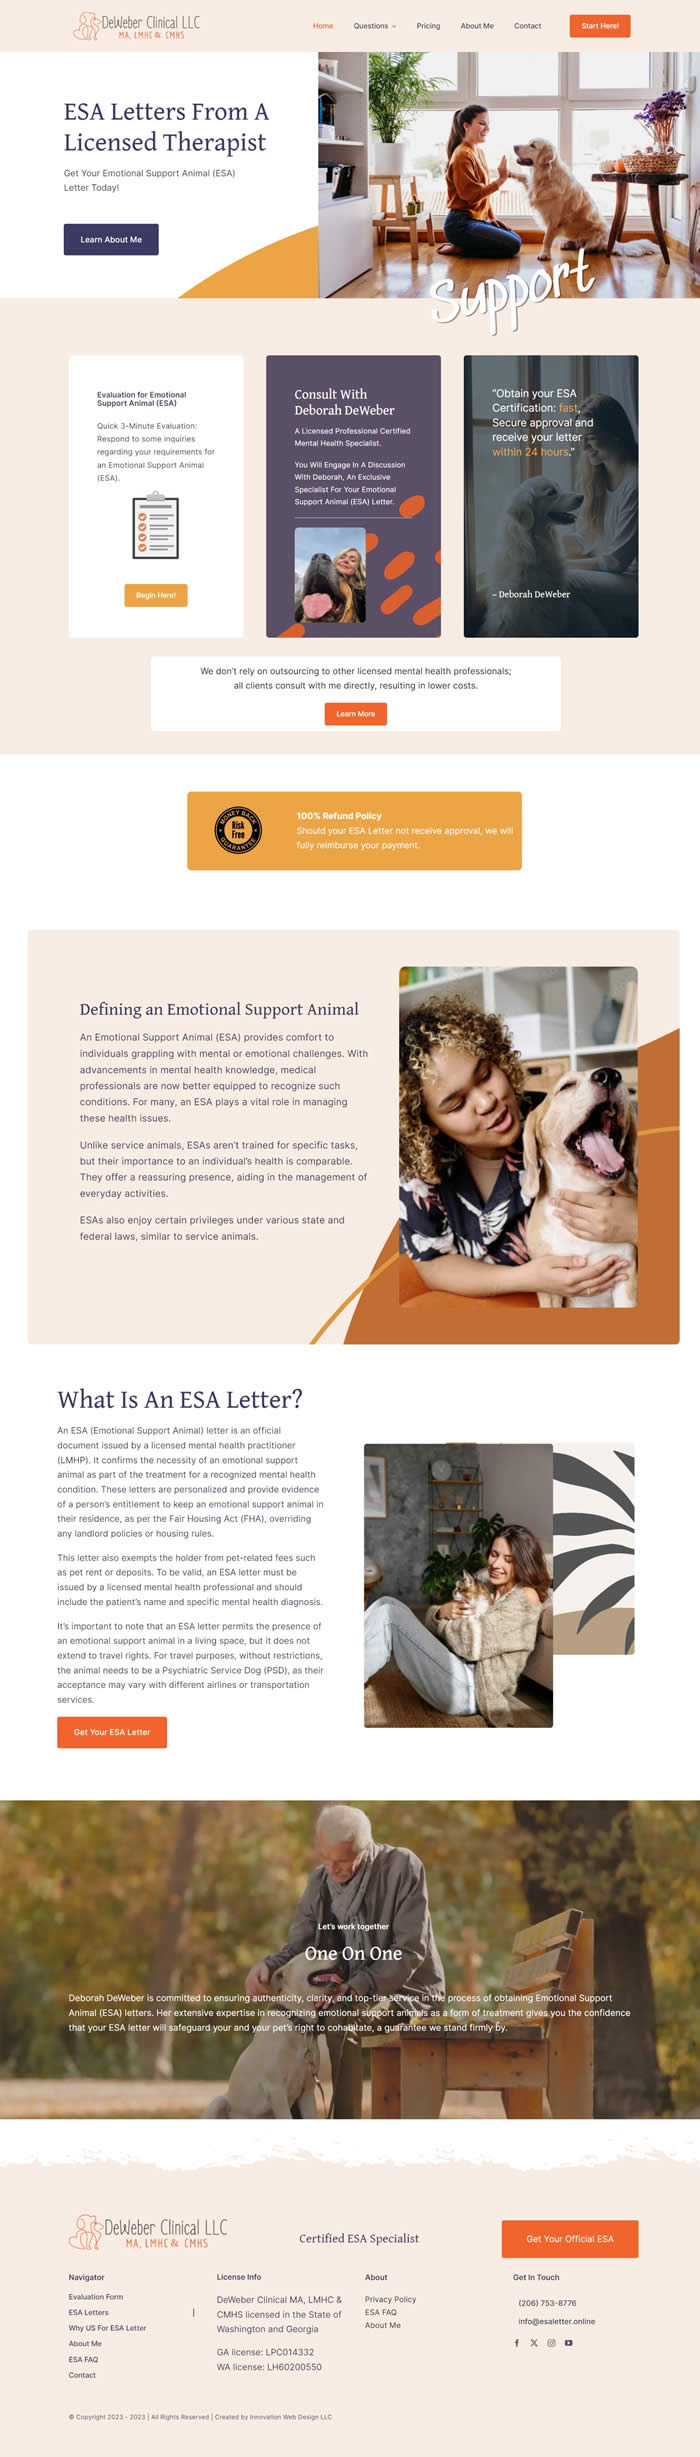 New WebDesign for ESA letters